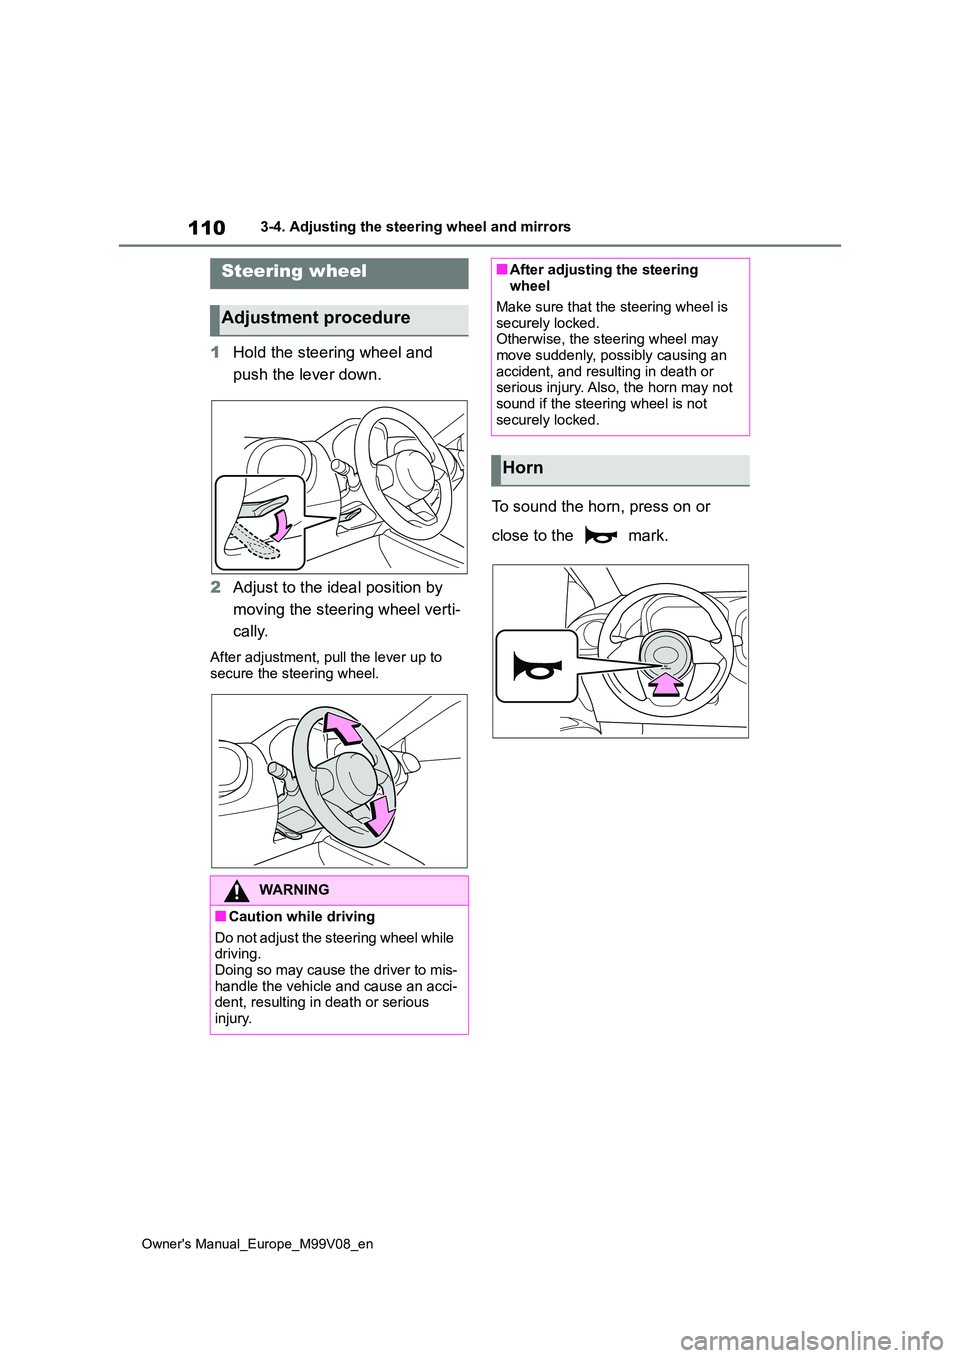 TOYOTA AYGO X 2022  Owners Manual (in English) 110
Owner's Manual_Europe_M99V08_en
3-4. Adjusting the steering wheel and mirrors
3-4.Adjusting  the steering  whe el an d mirrors
1Hold the steering wheel and  
push the lever down. 
2 Adjust to 